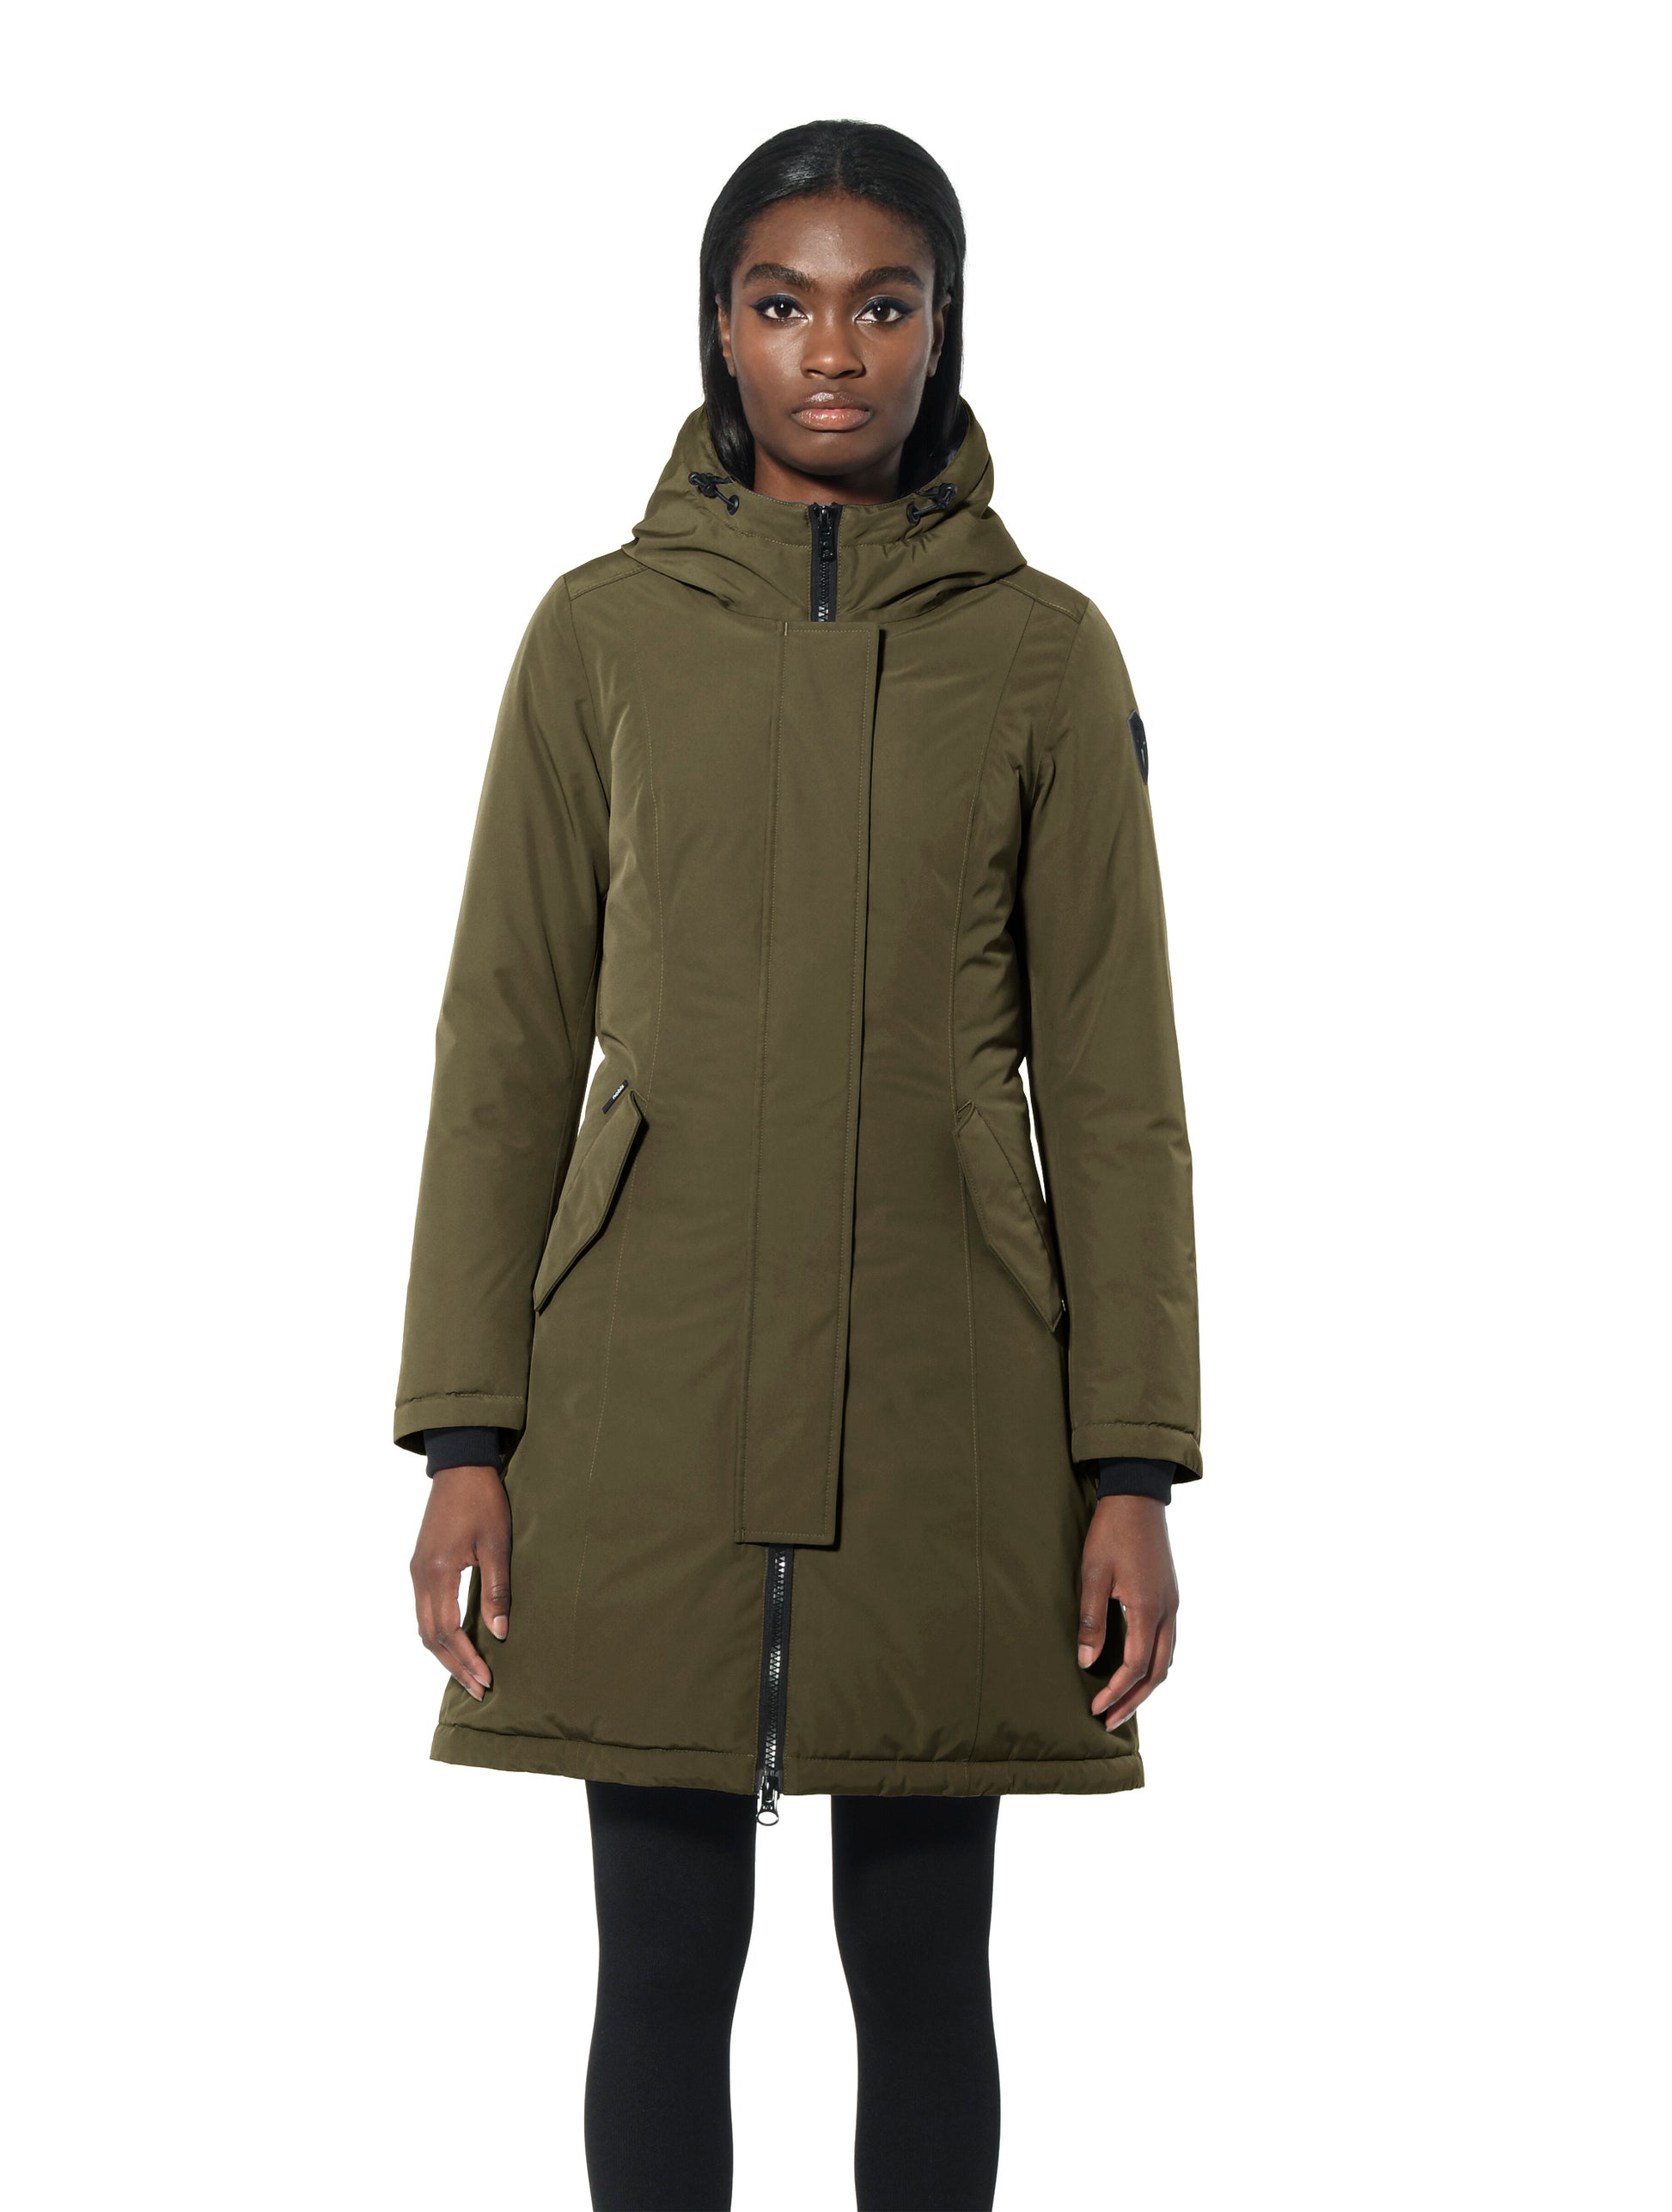 Ladies thigh length down-filled parka with non-removable hood in Fatigue